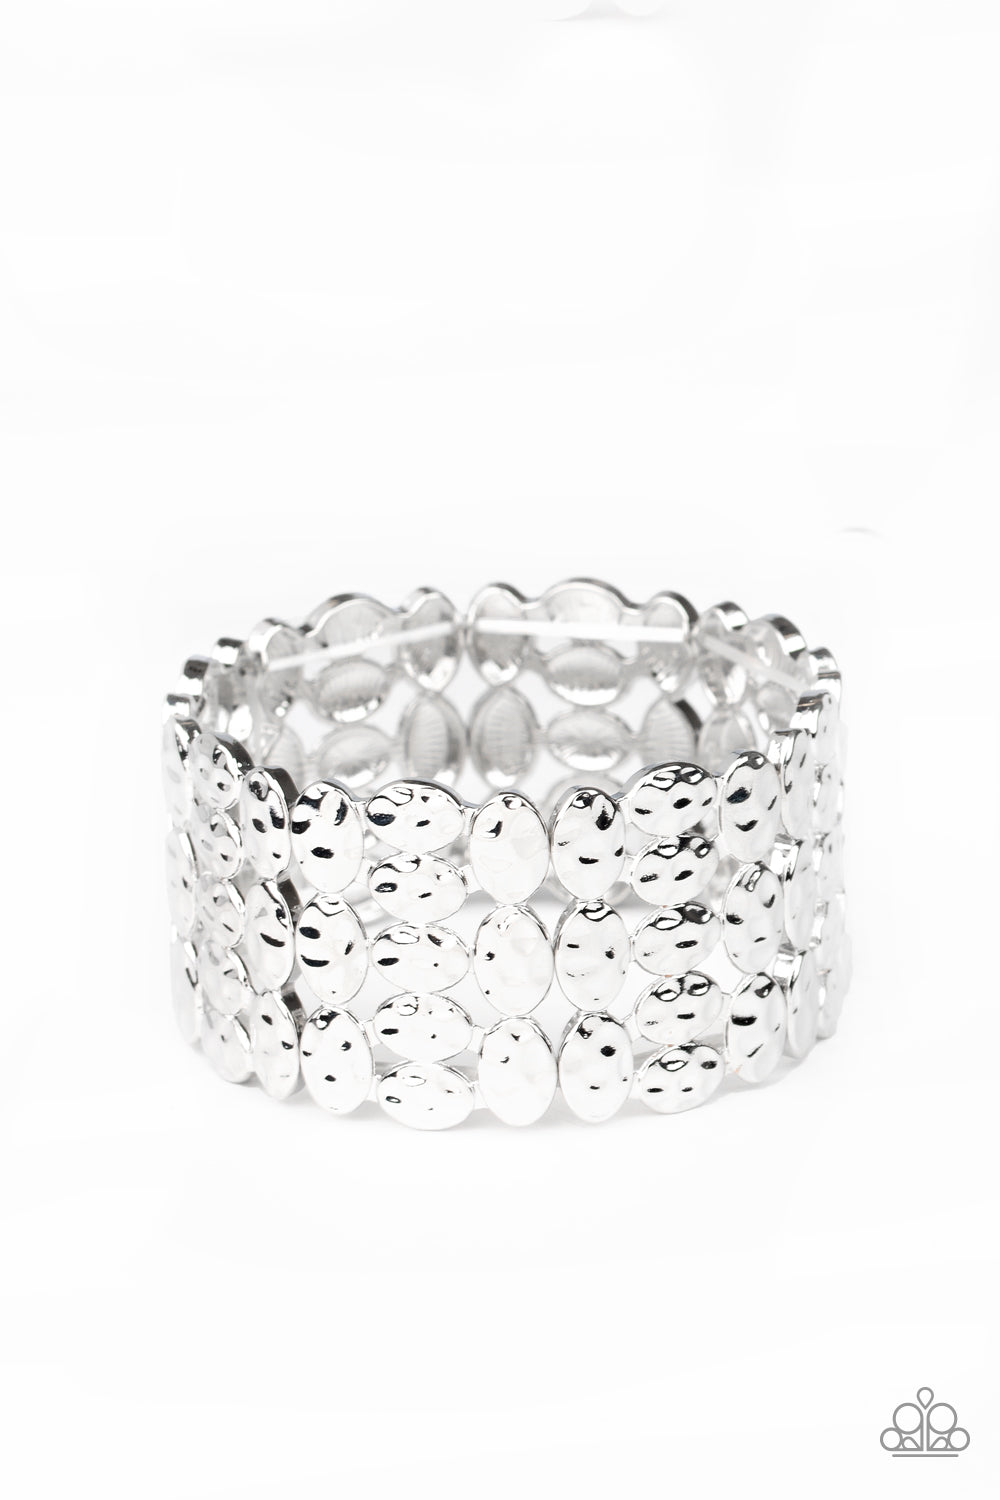 Tectonic Texture - Silver - VJ Bedazzled Jewelry